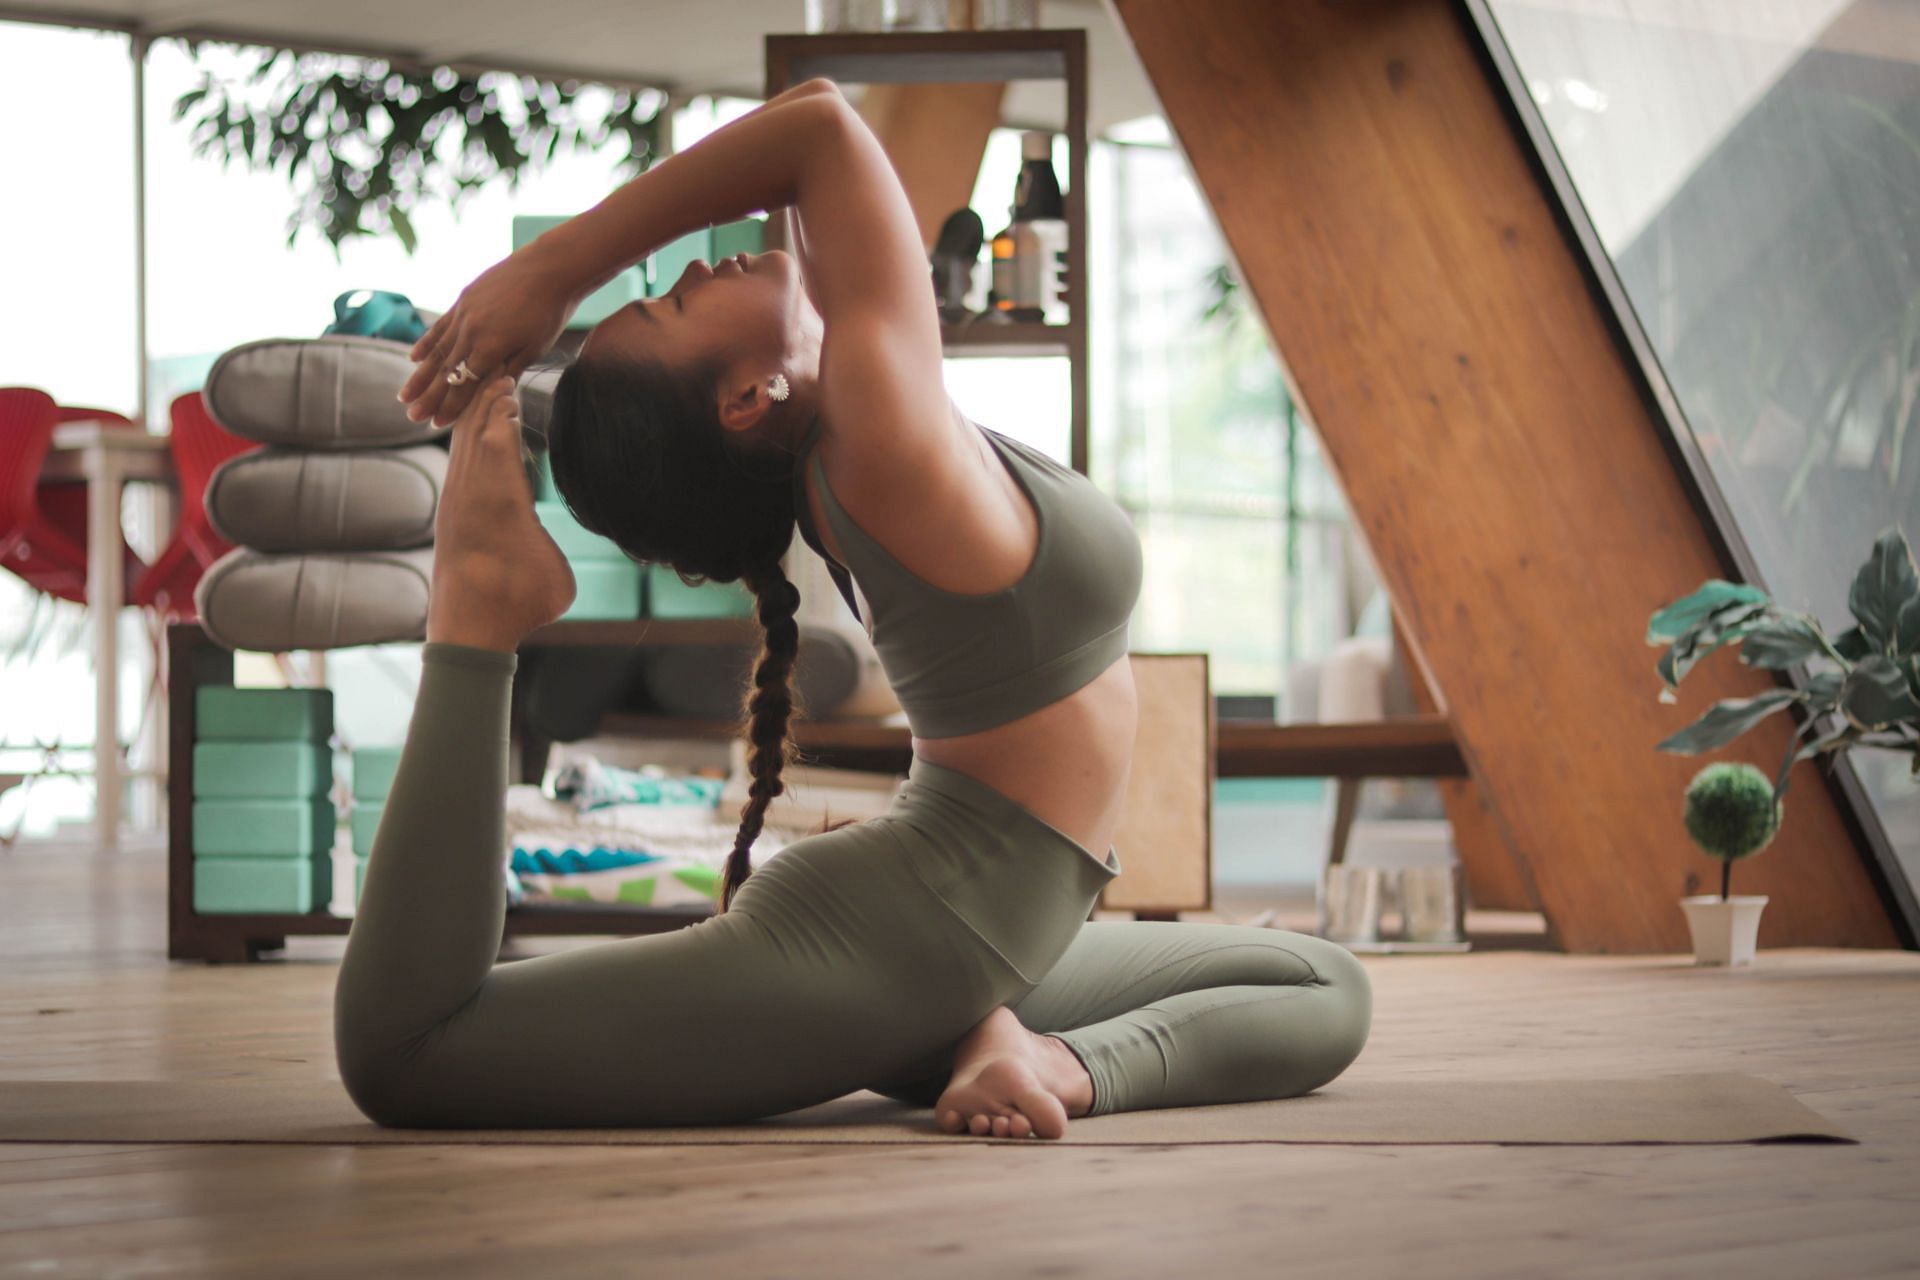 Regular yoga exercise will improve both your physical and mental health. (Image via Unsplash/ Carl Barcelo)